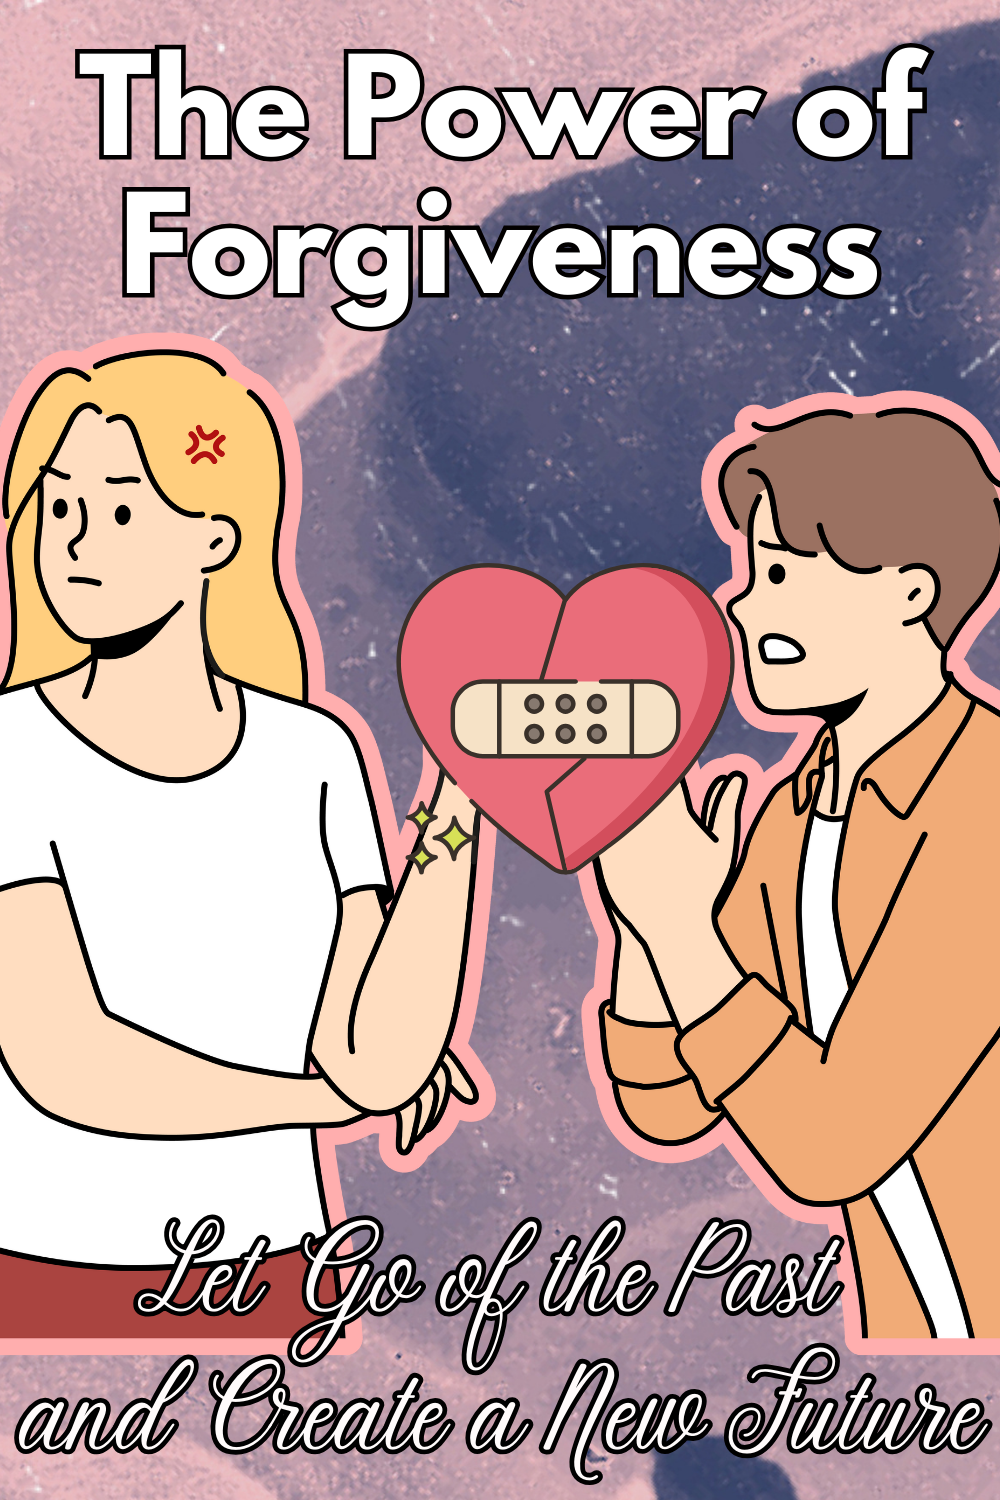 How to Practice Forgiveness: Steps to Release the Past and Embrace Your Future